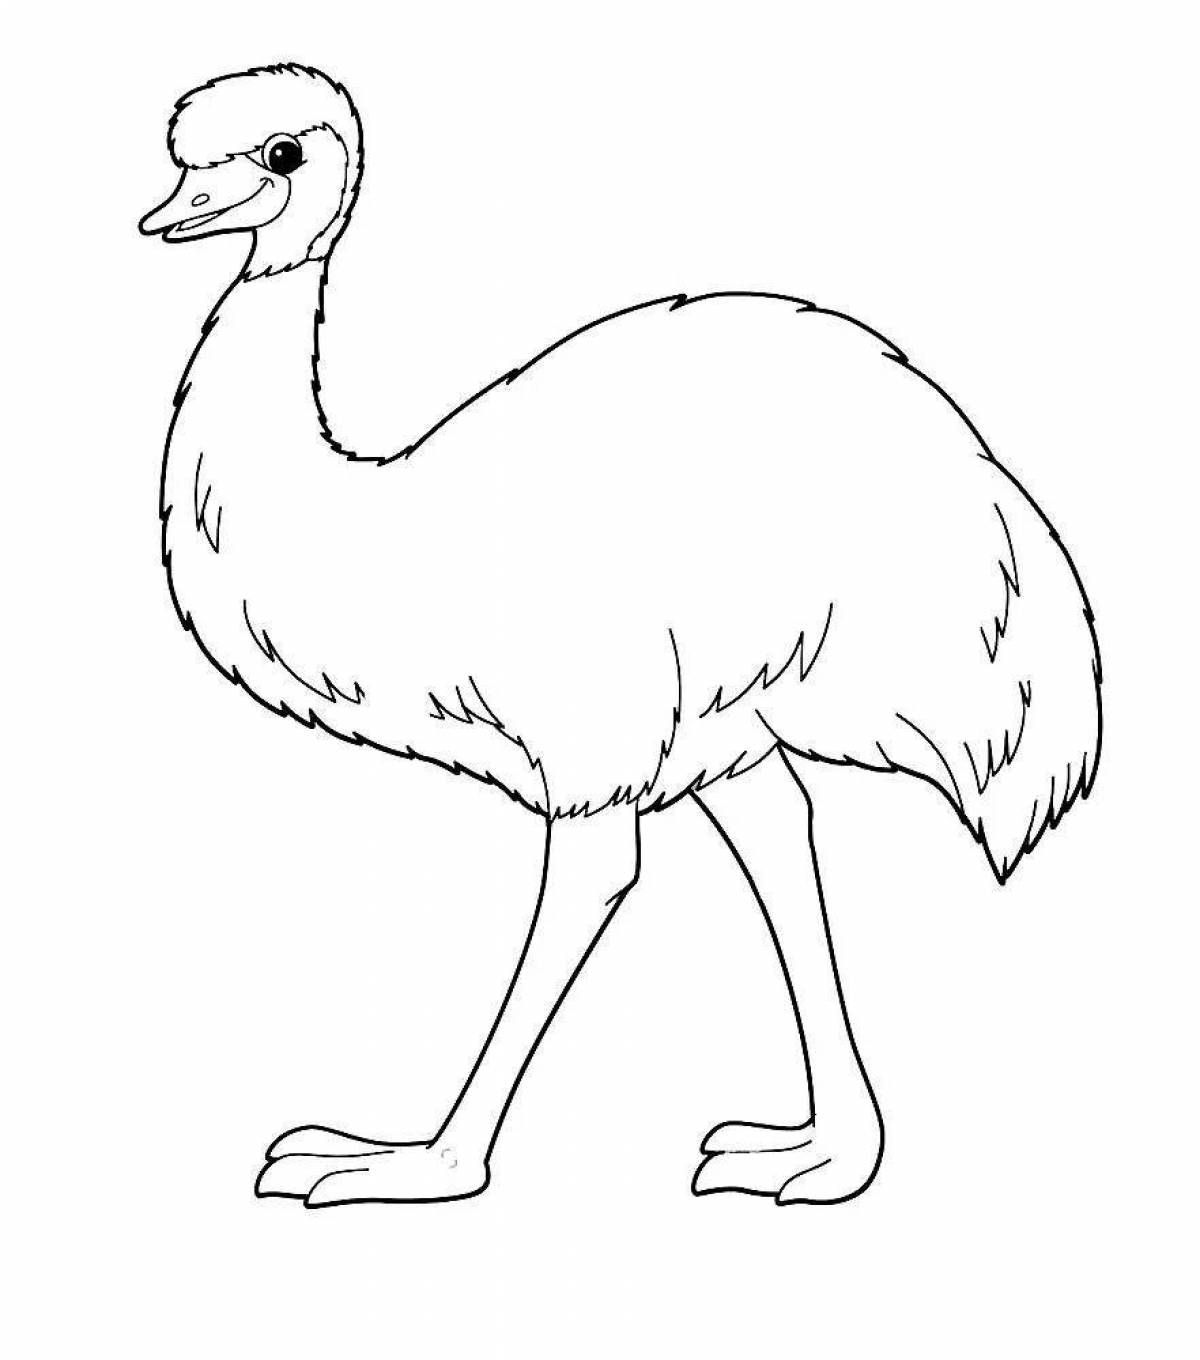 Fancy emu coloring book for kids